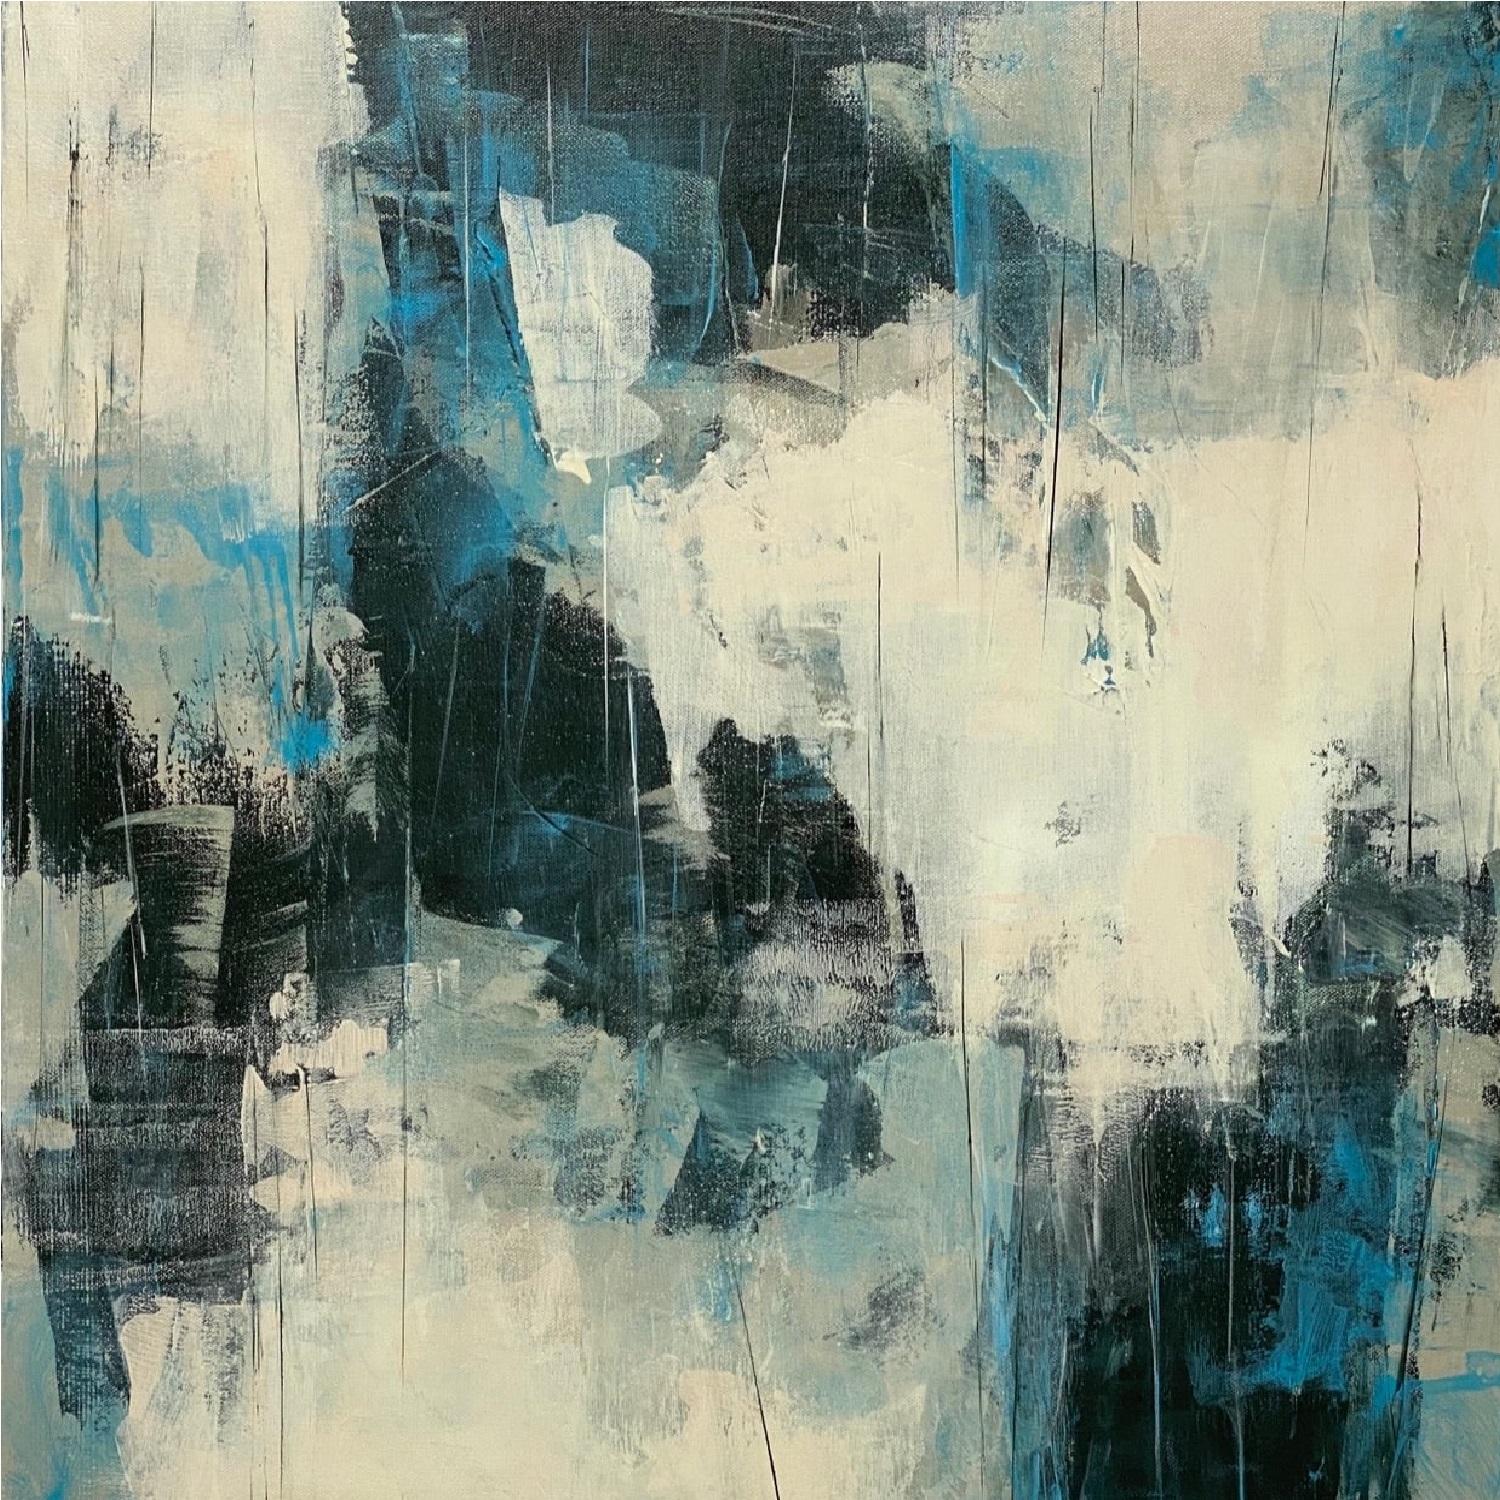 Juanita Bellavance  Abstract Painting - Cutting Edge, blue, black, white, gray, abstract expressionism